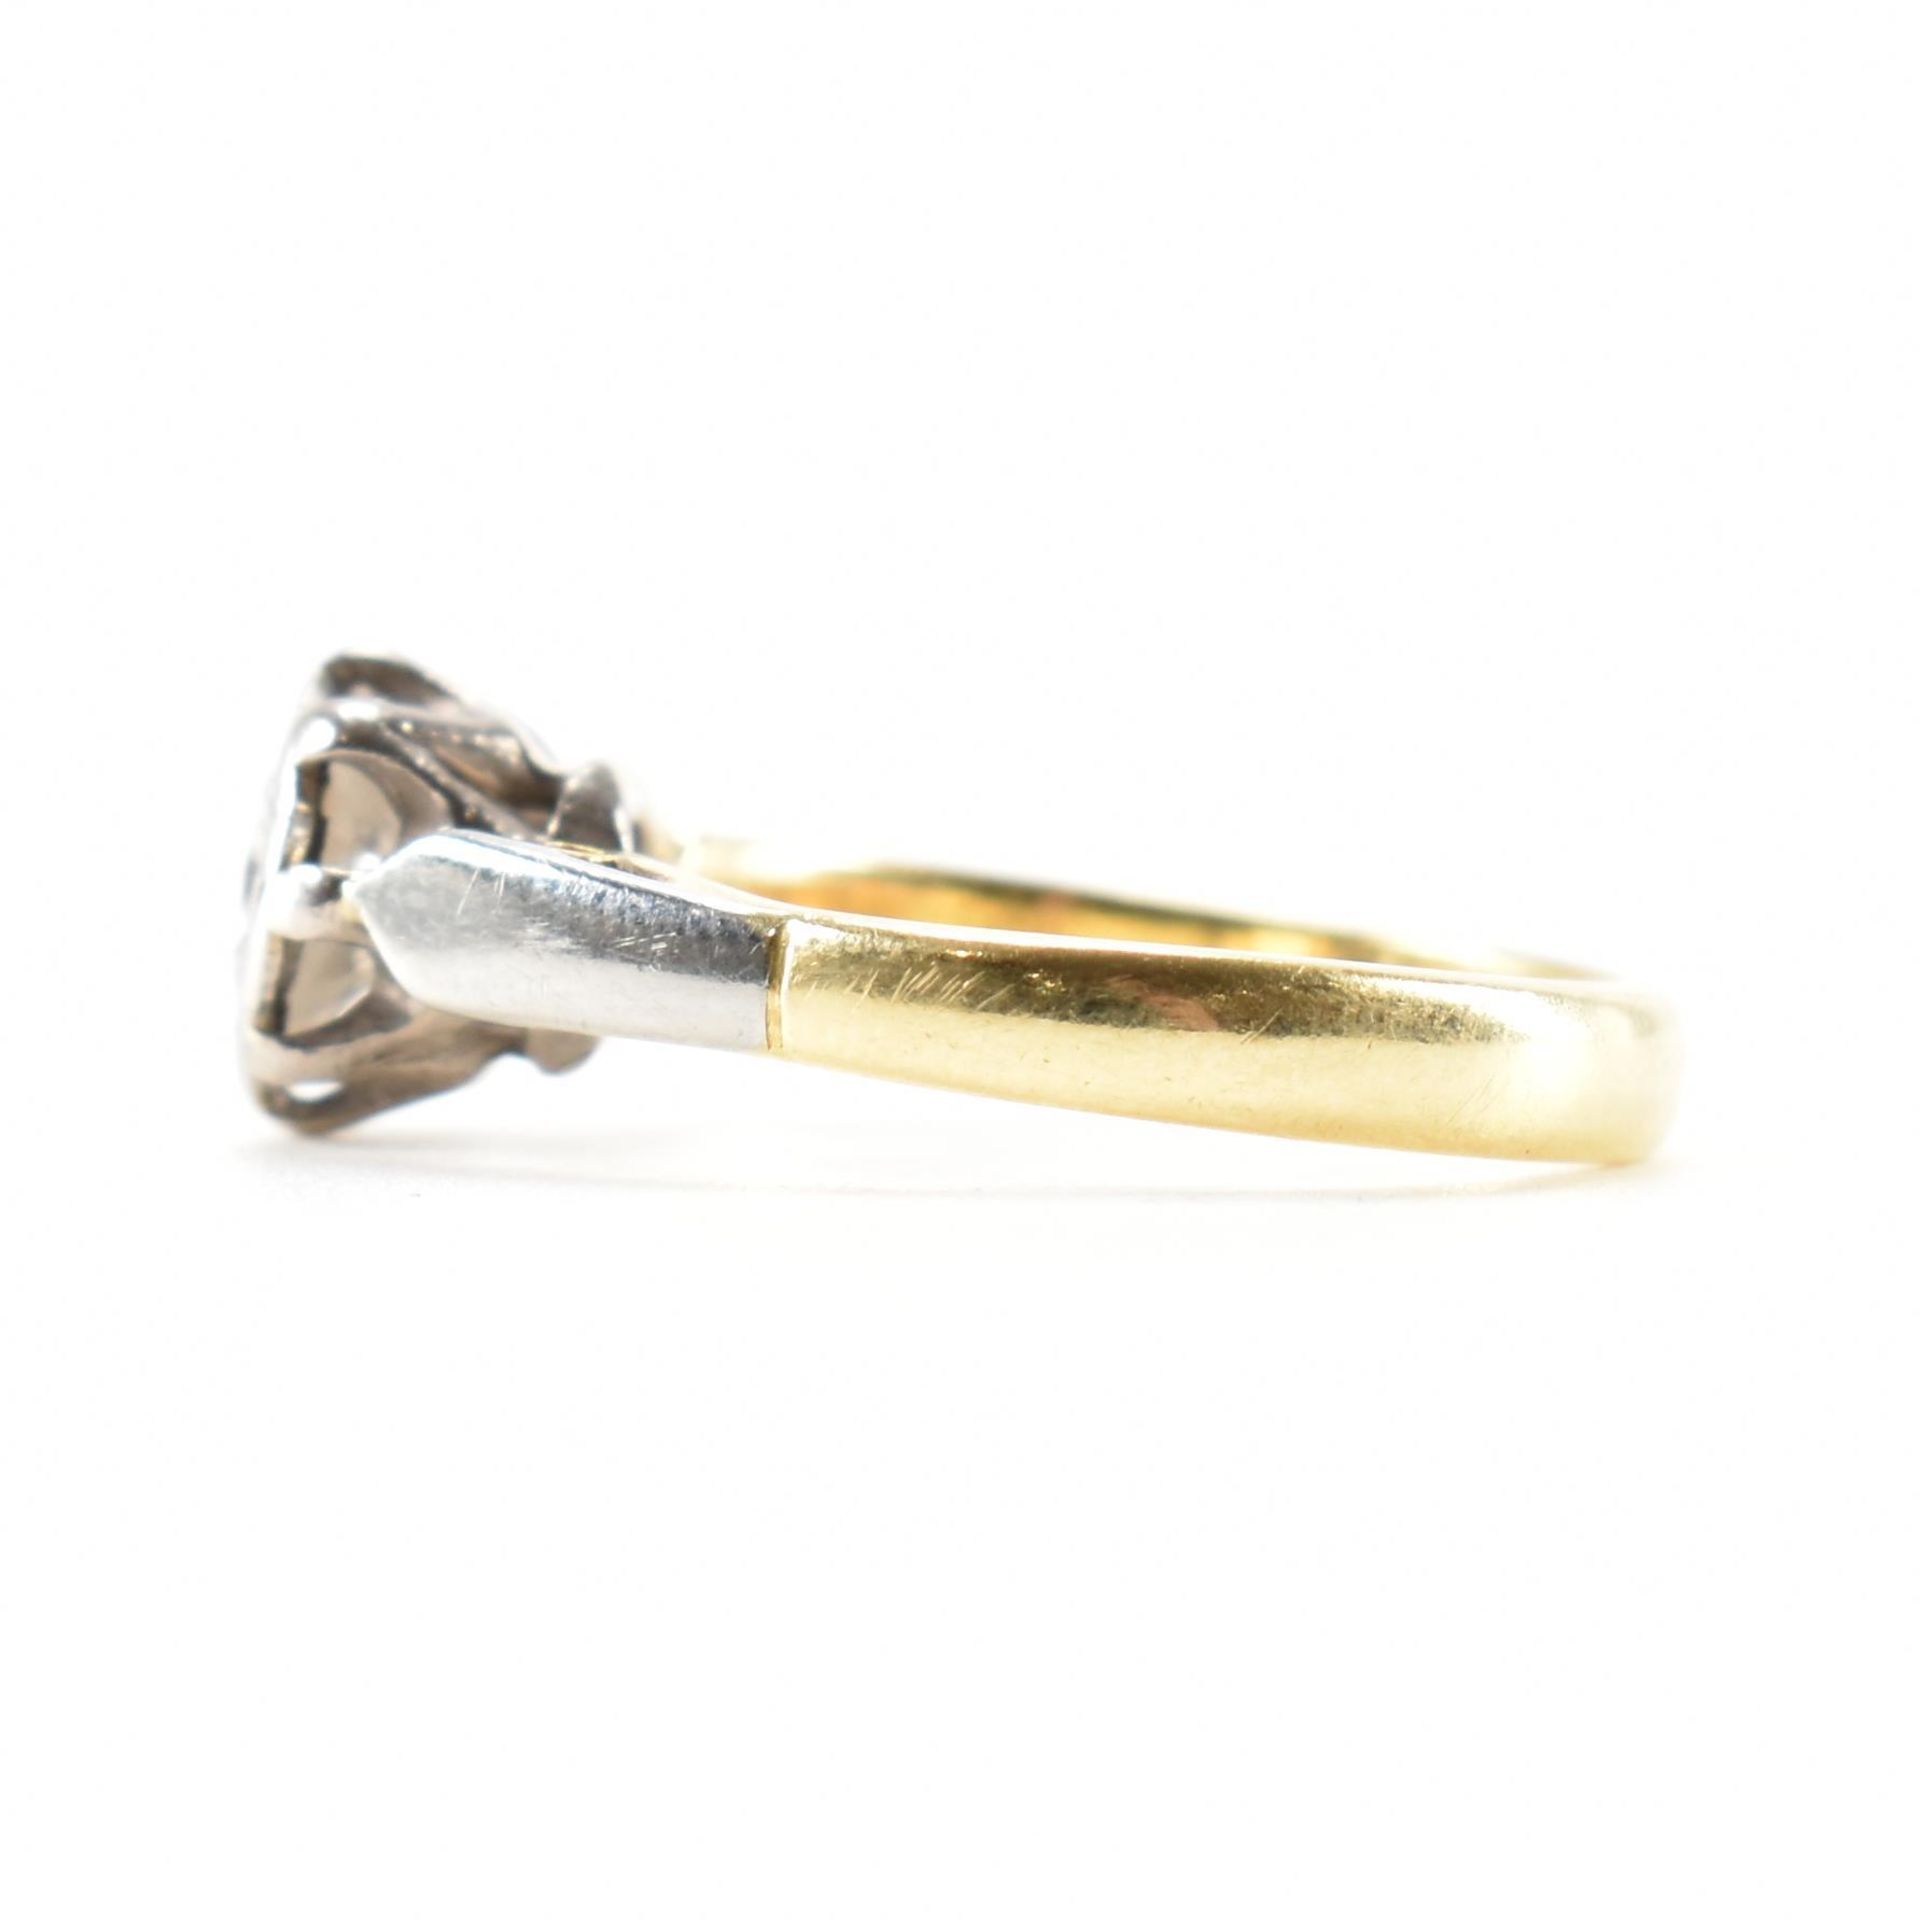 VINTAGE 18CT GOLD & DIAMOND SOLITAIRE RING - Image 2 of 8